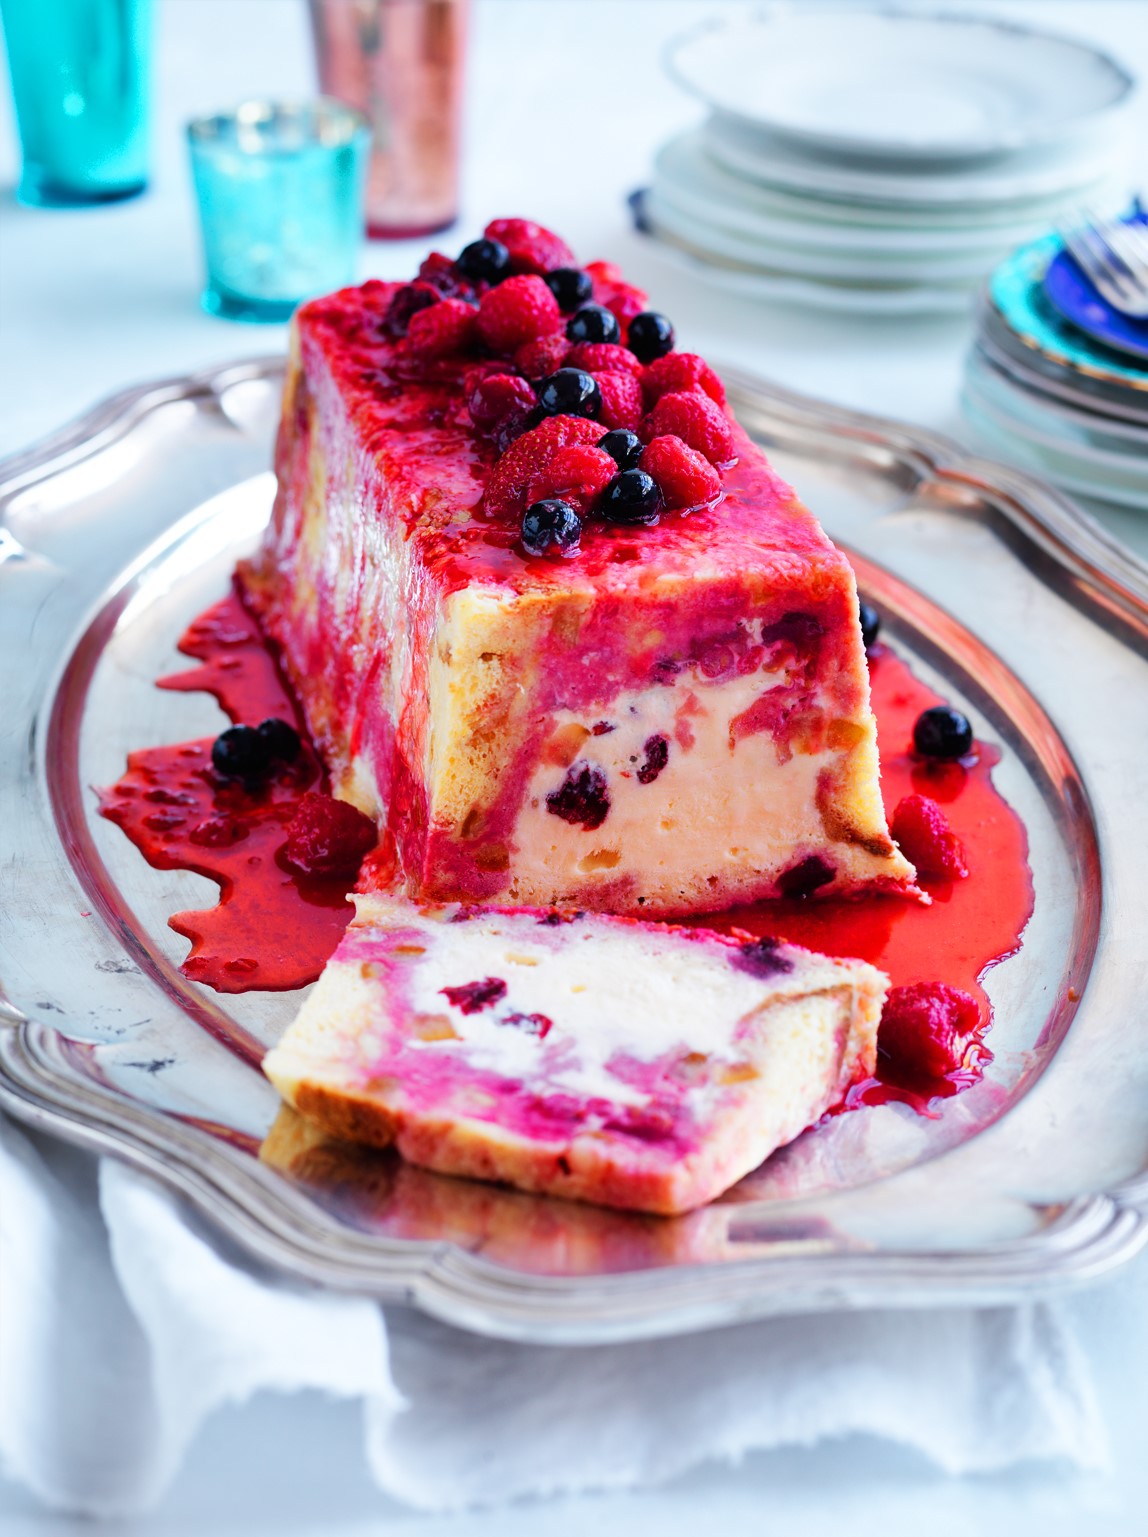 American Summer Pudding with White Chocolate and Cherry Icecream Appetizer